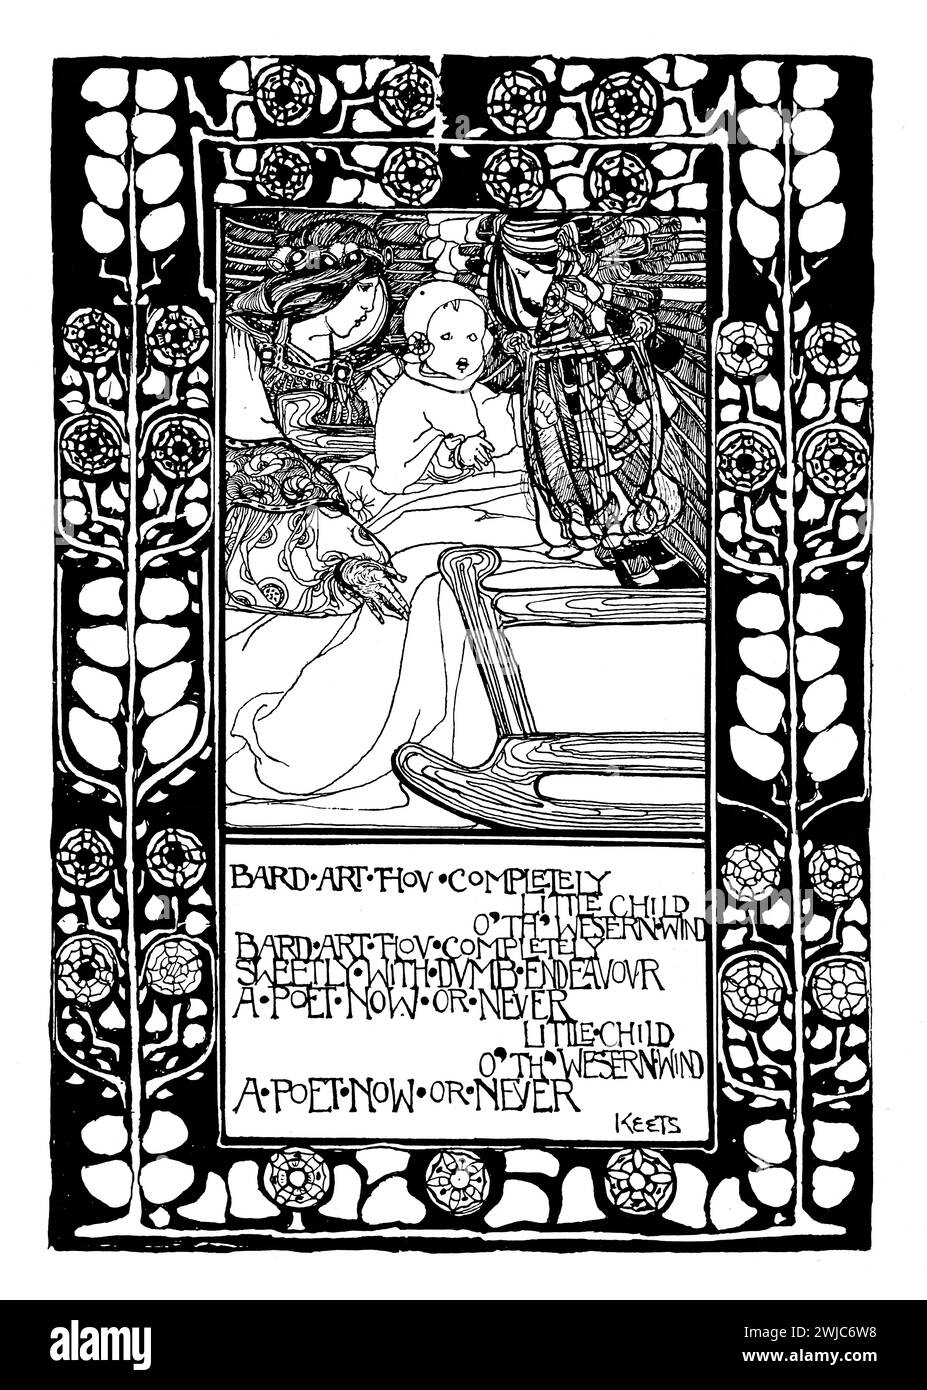 1901 Tis the witching time of night poem, by John Keats line illustration by Chance Stock Photo